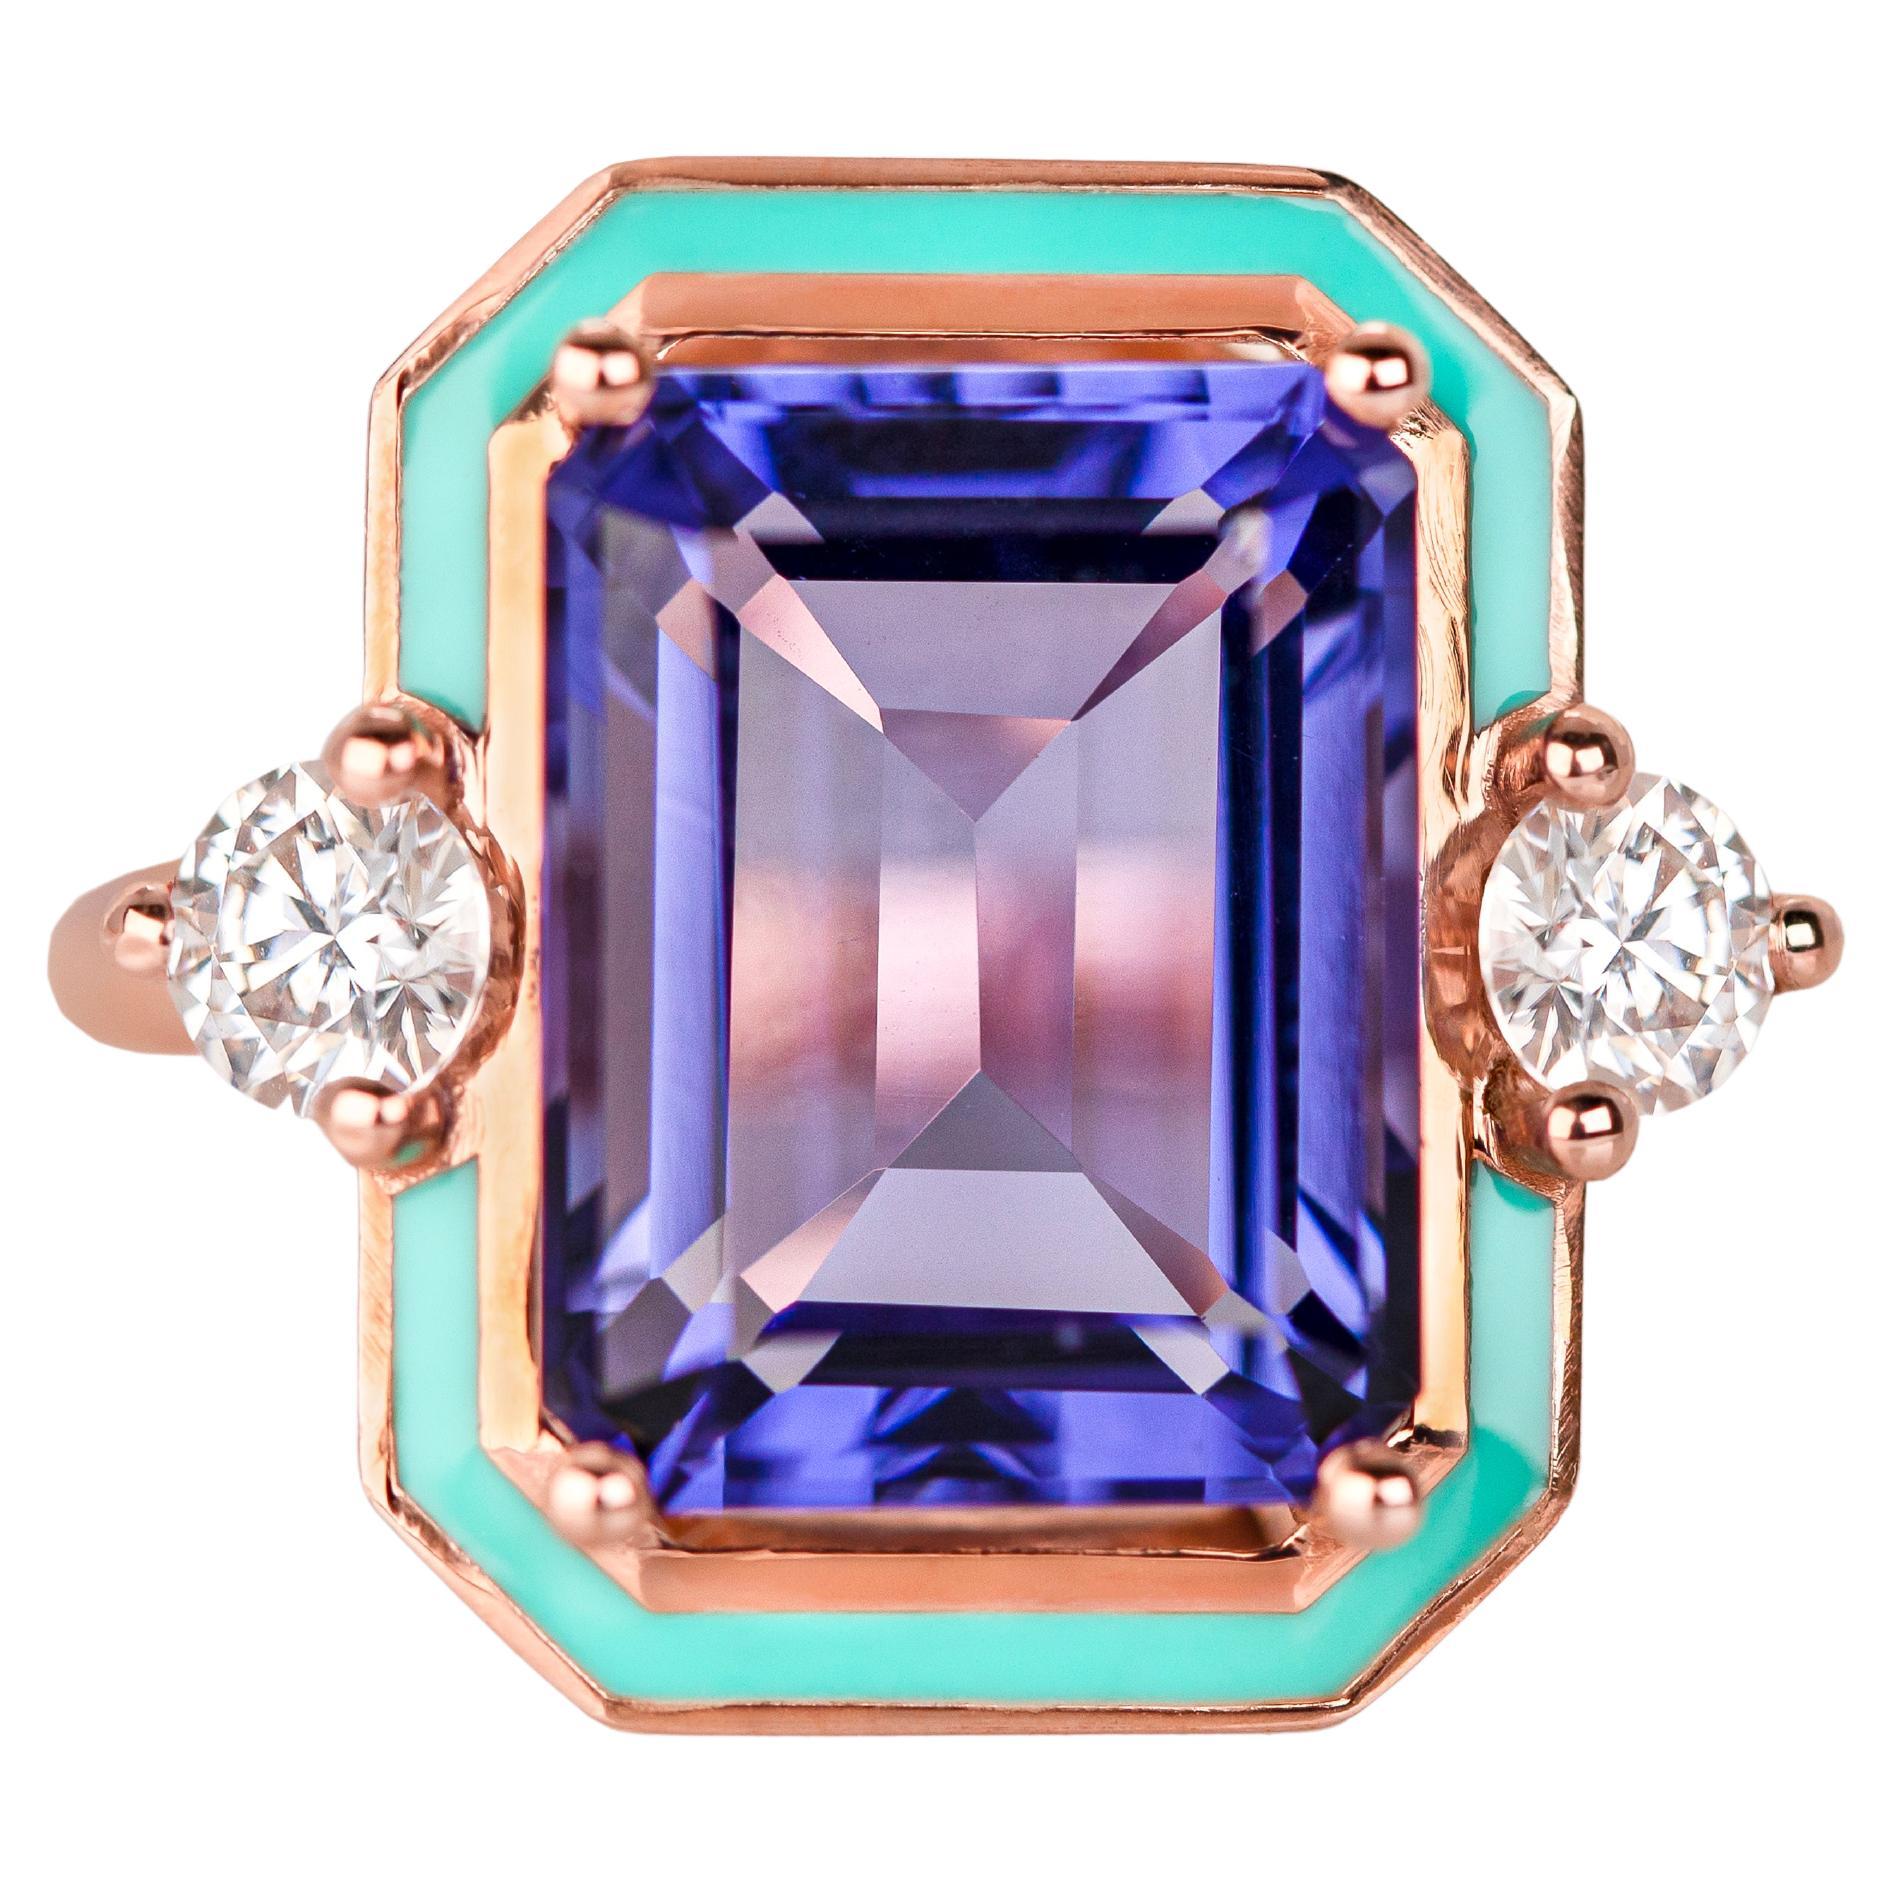 Art Deco Style, Tanzanite and Moissanite Stone Ring, 14K Gold Ring